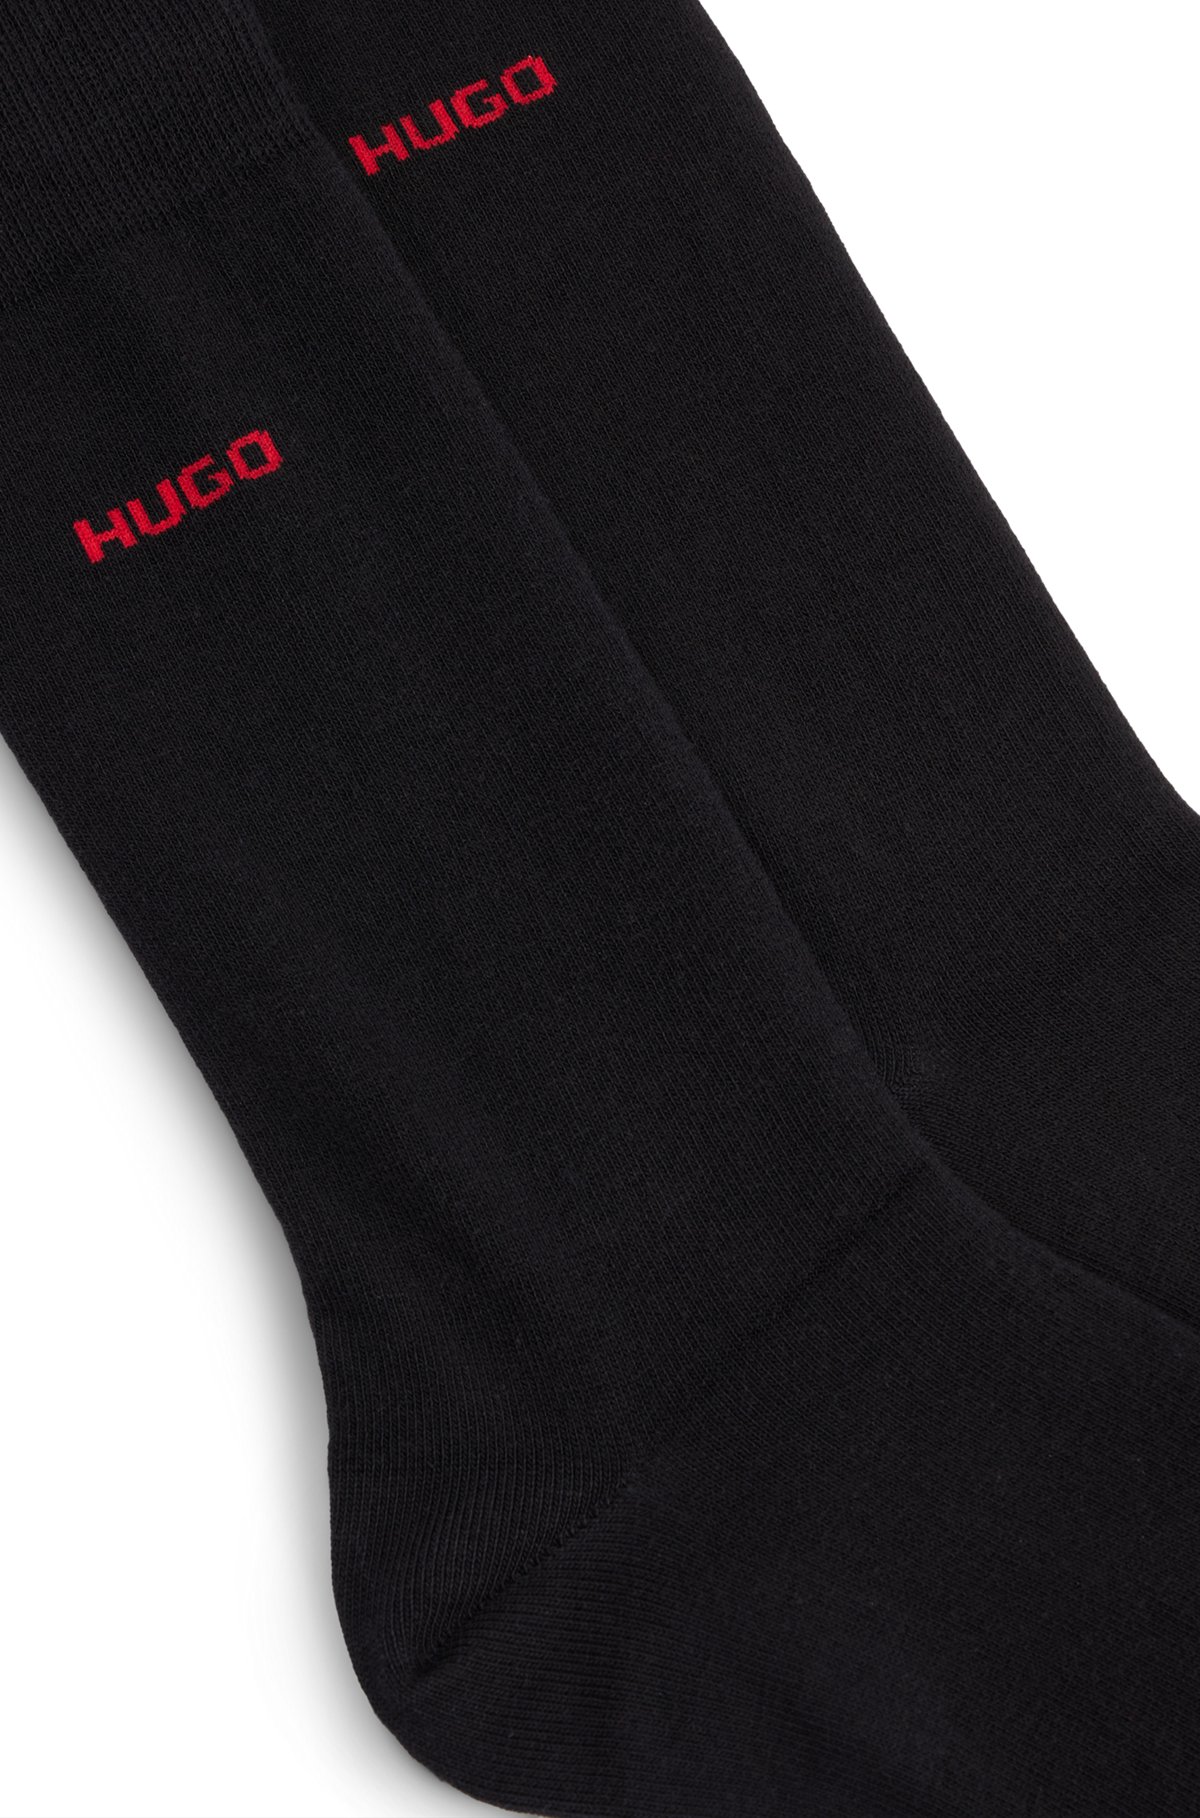 Two-pack of regular-length socks in stretch fabric, Black